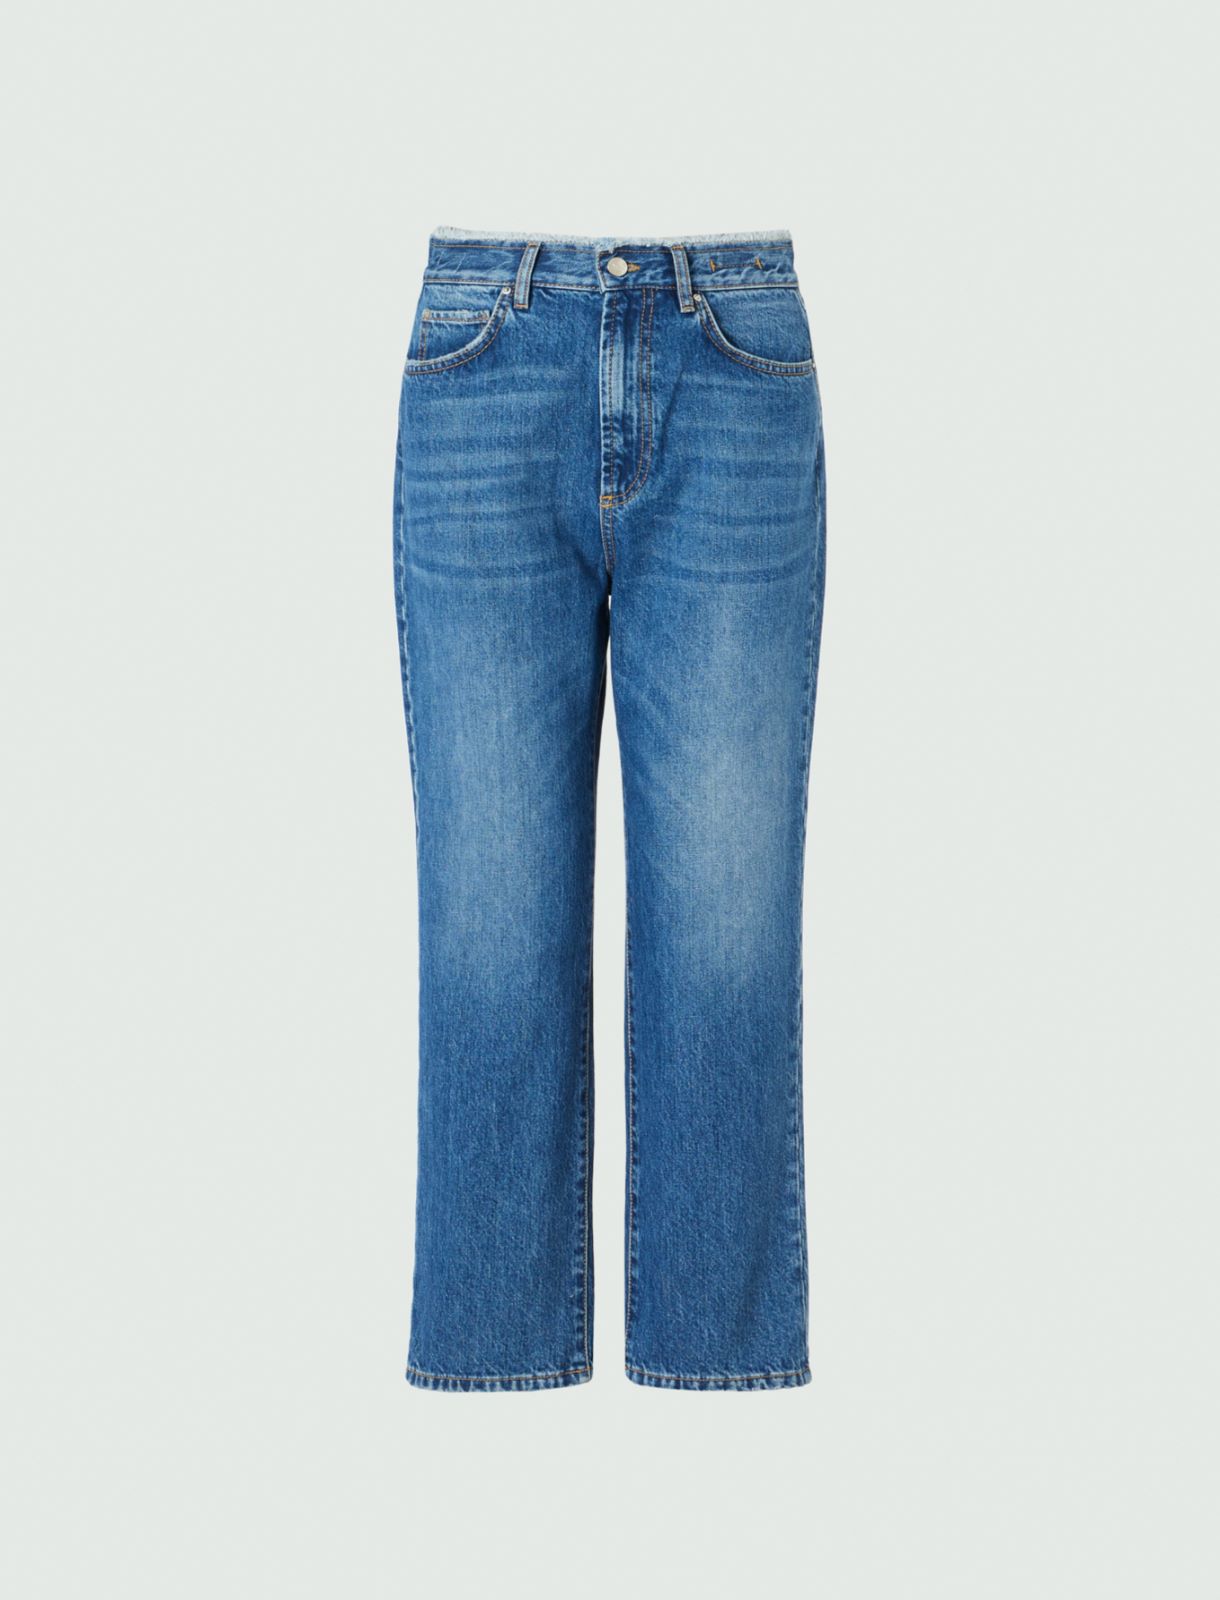 Jeans mom fit - Blue jeans - Marella - 6